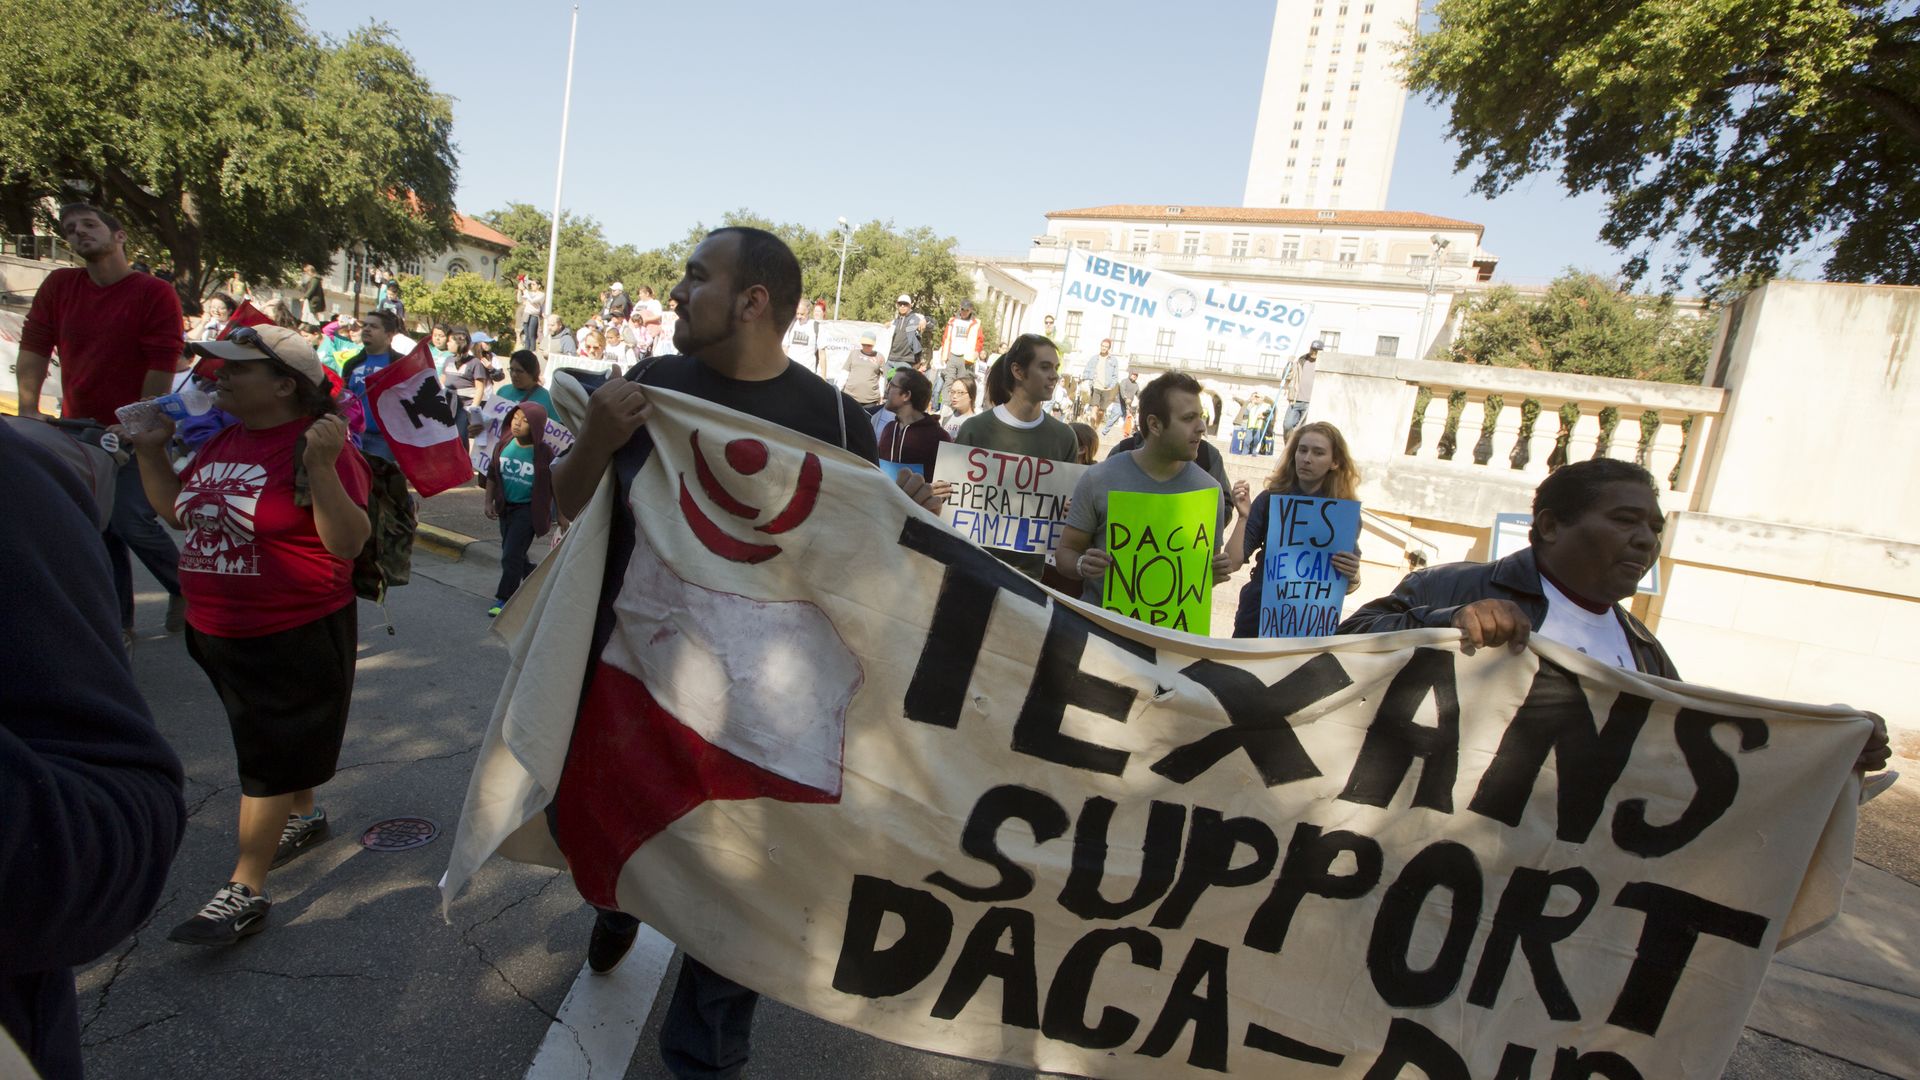 A demonstration march in favor of DACA